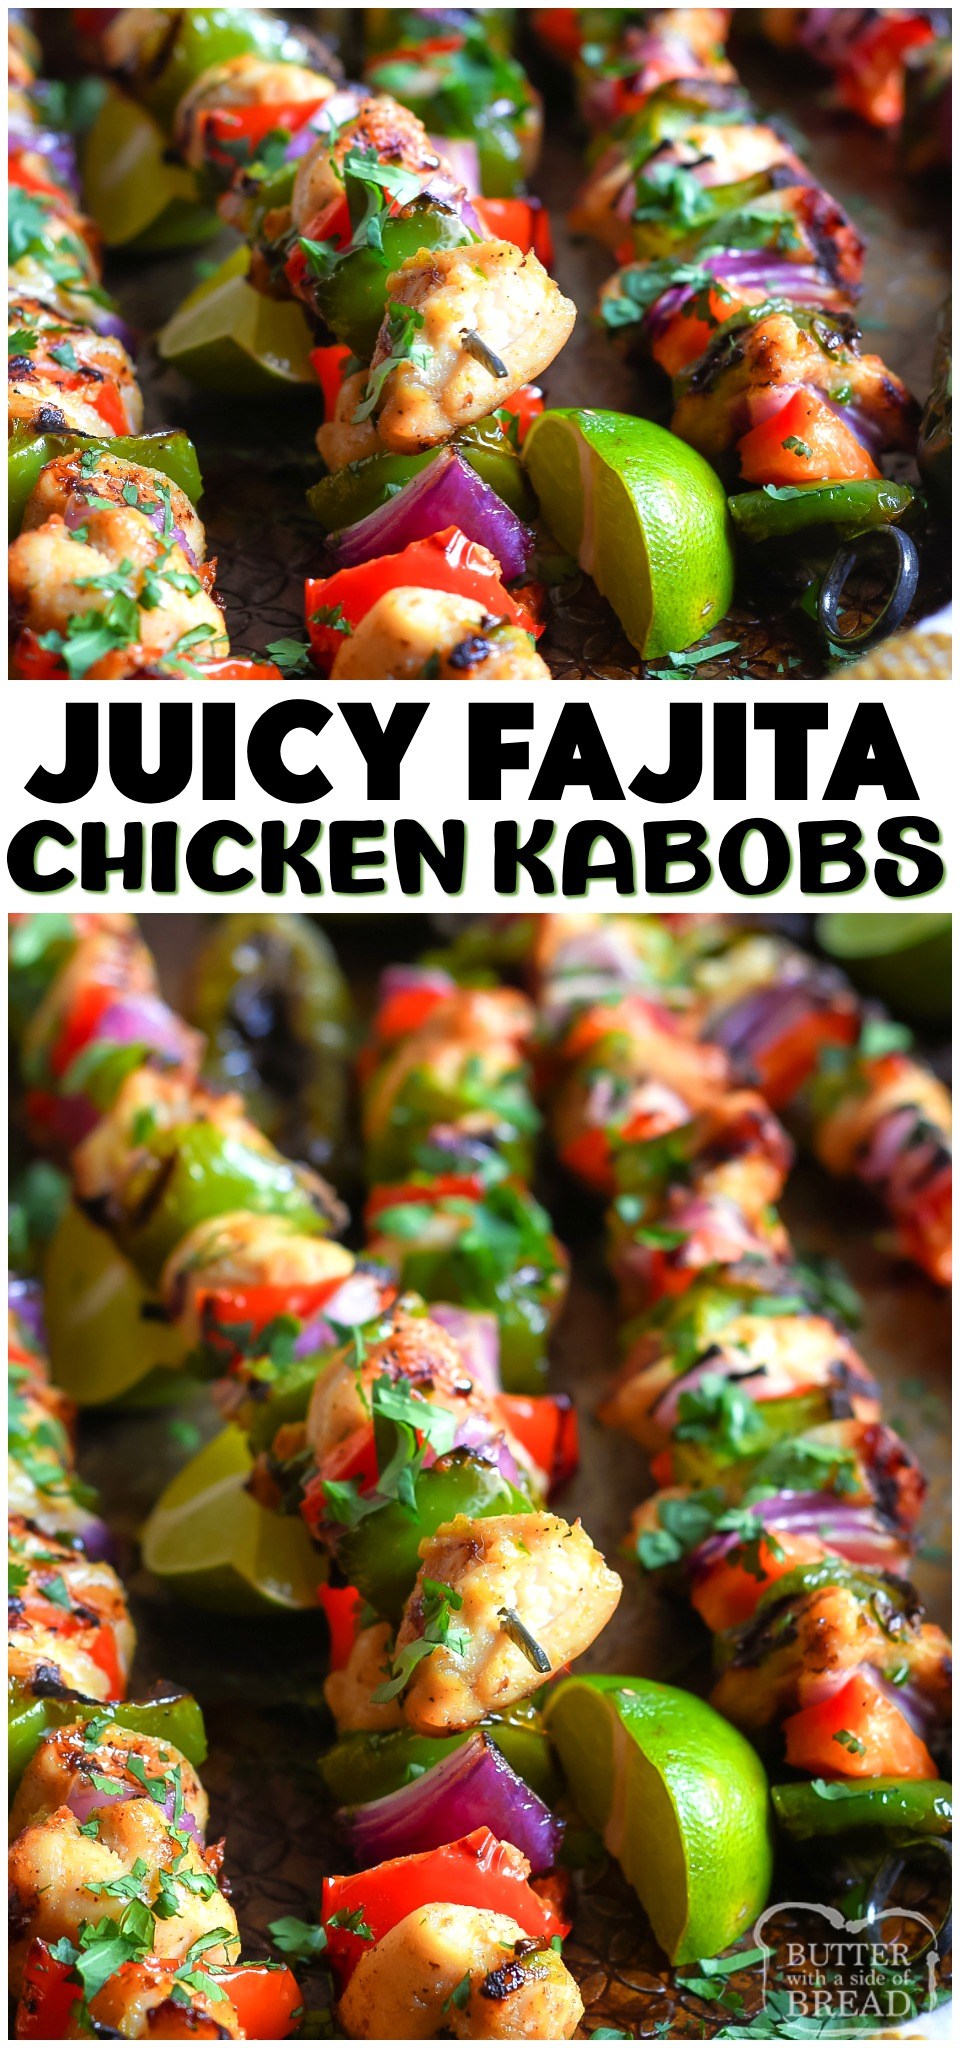 Fajita chicken kabobs are all your favorite fajita flavors on a grilled kabob! Tender & flavorful chicken with bell peppers and onion grilled together and ready to serve. #kabobs #grilling #bbq #fajitas #chicken #dinner #chickenkabobs #grilled #recipe from BUTTER WITH A SIDE OF BREAD